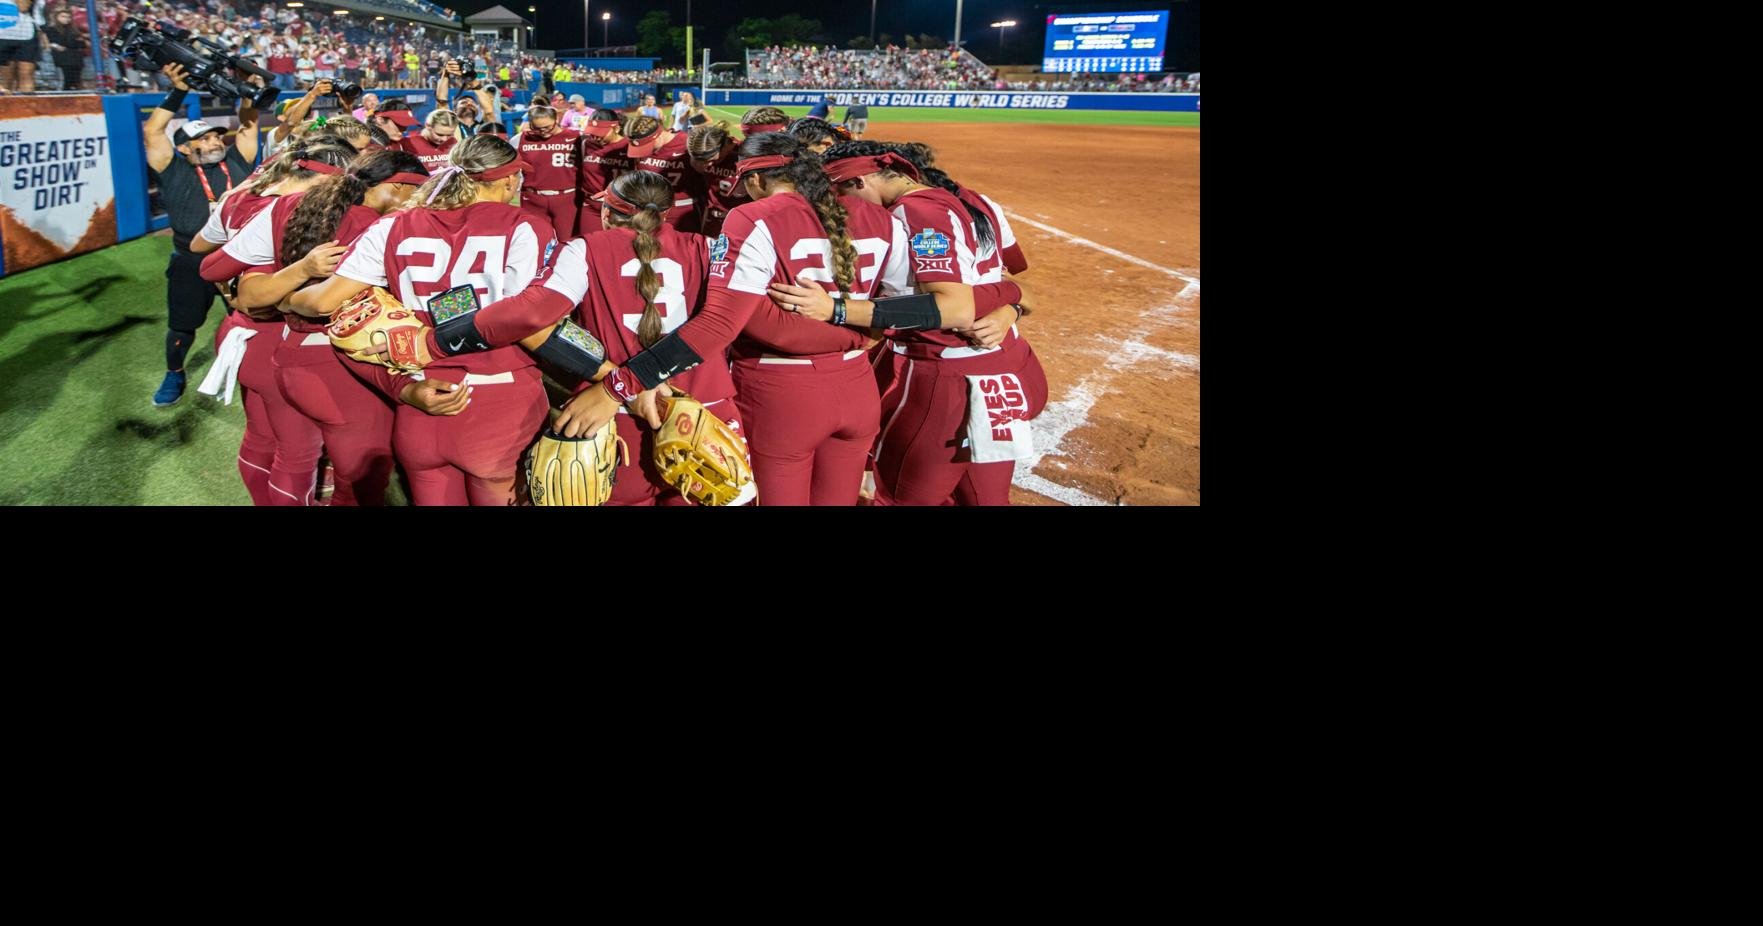 WCWS Live updates from OU vs. Florida State in Game 2 Sports